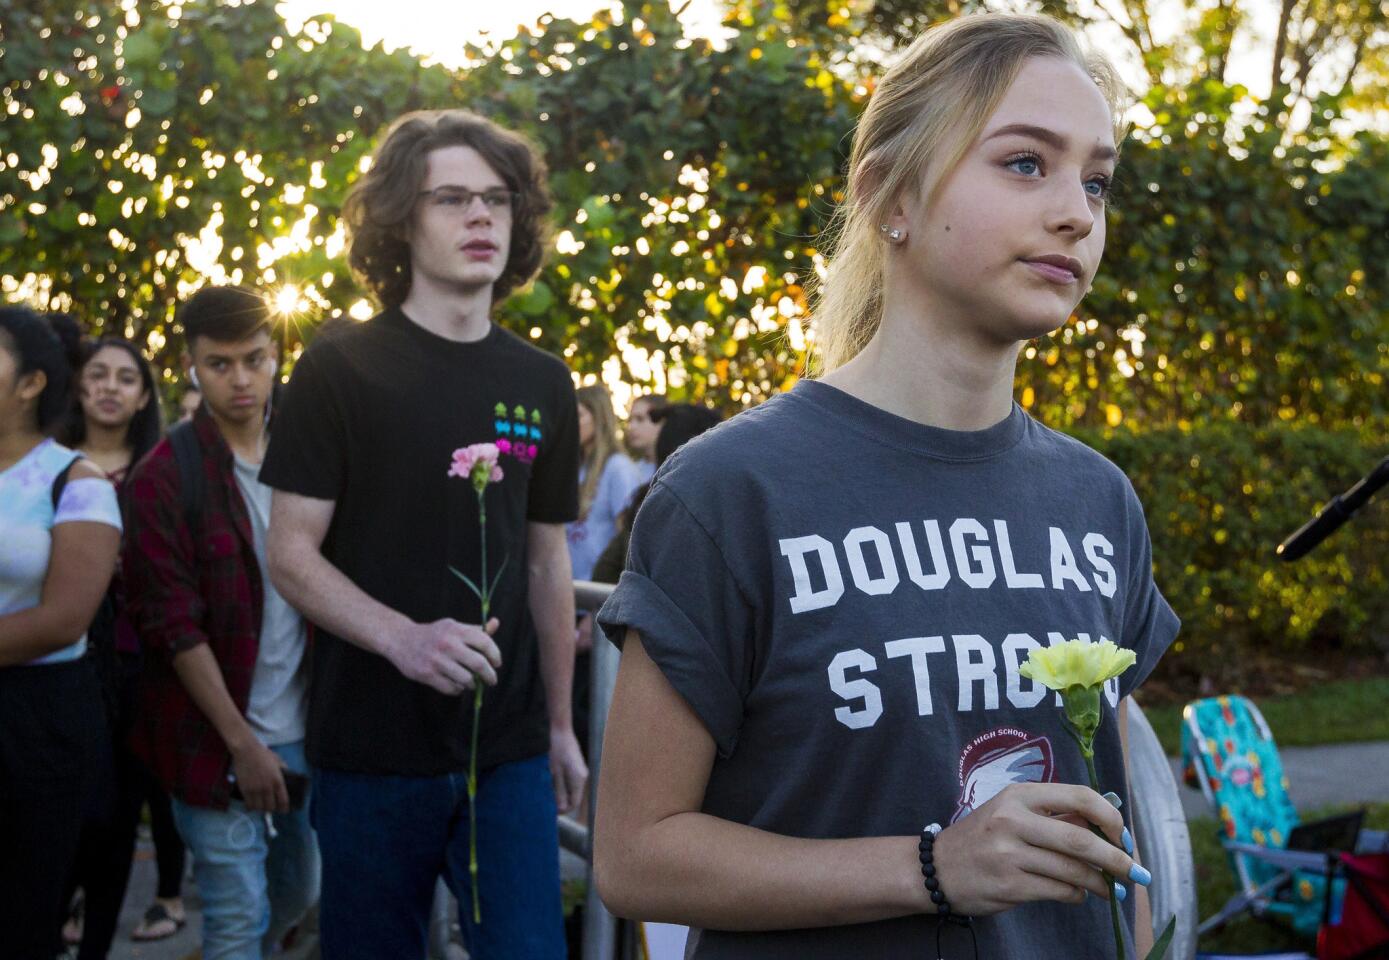 Students were greeted by supporters, signs and flowers as they returned to class at Marjory Stoneman Douglas High School on Wednesday.